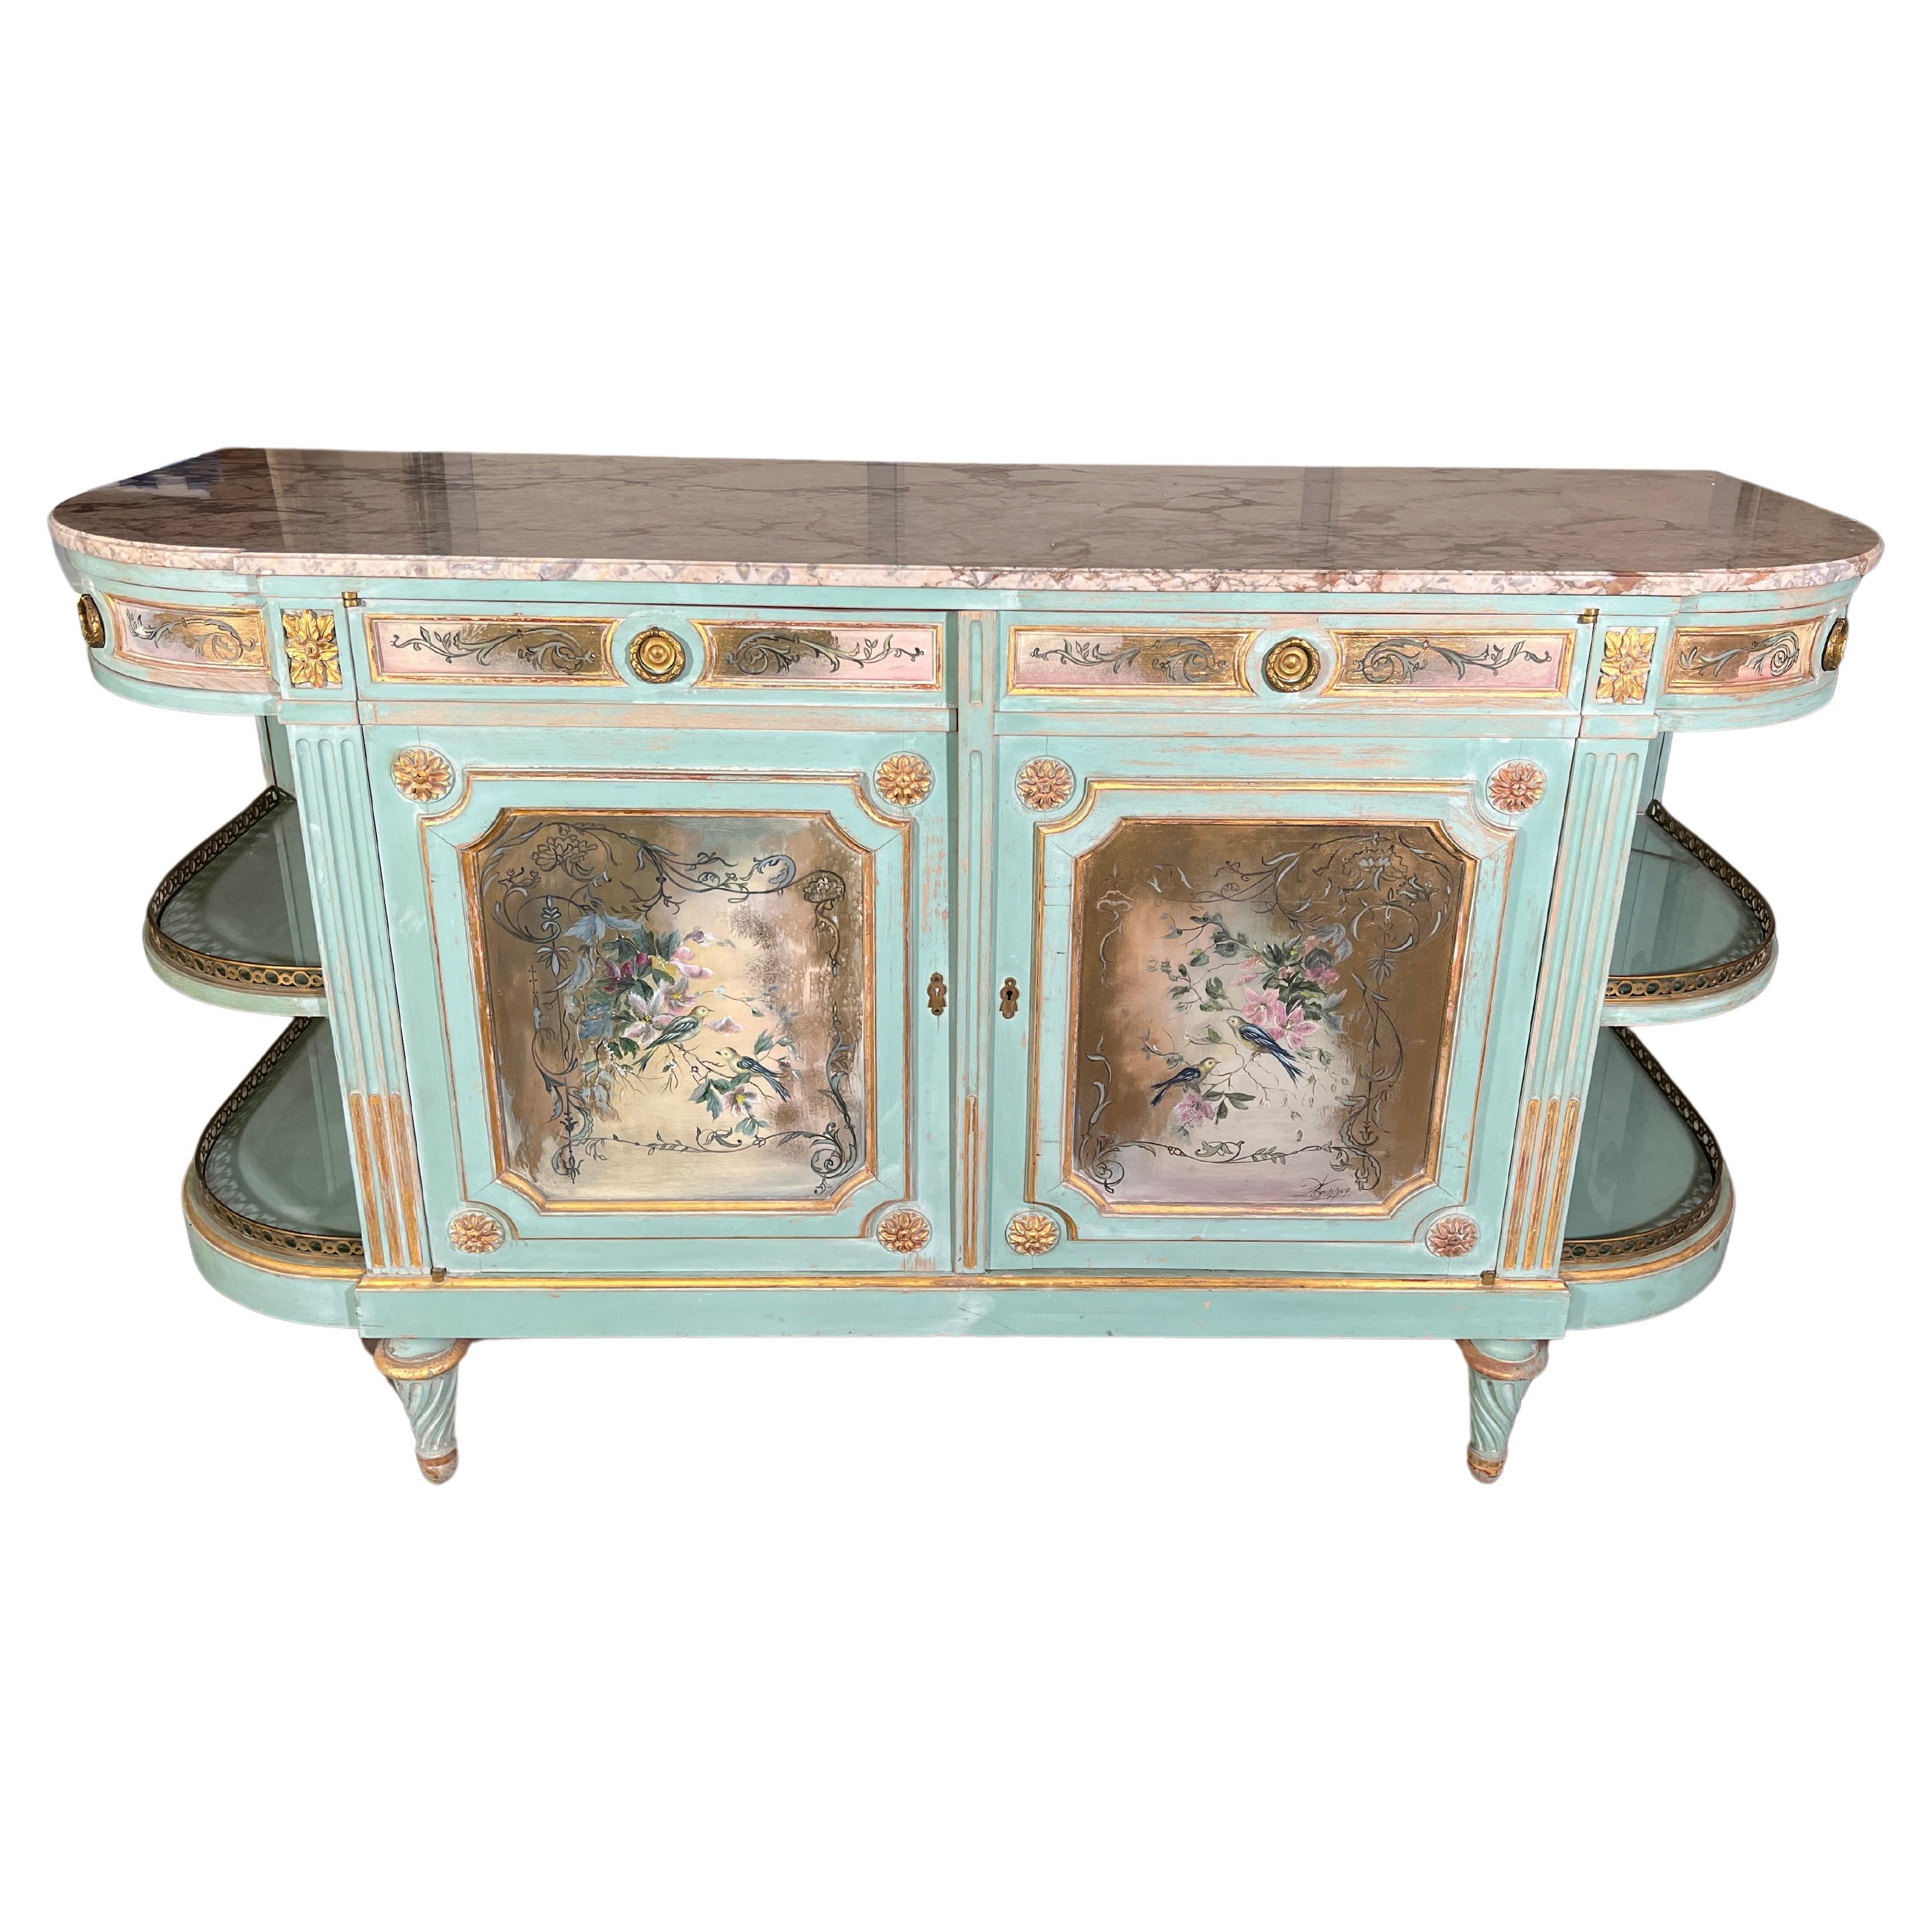 19th Century (Late) Louis XVI Style Painted Sideboard From Soubrier Paris For Sale